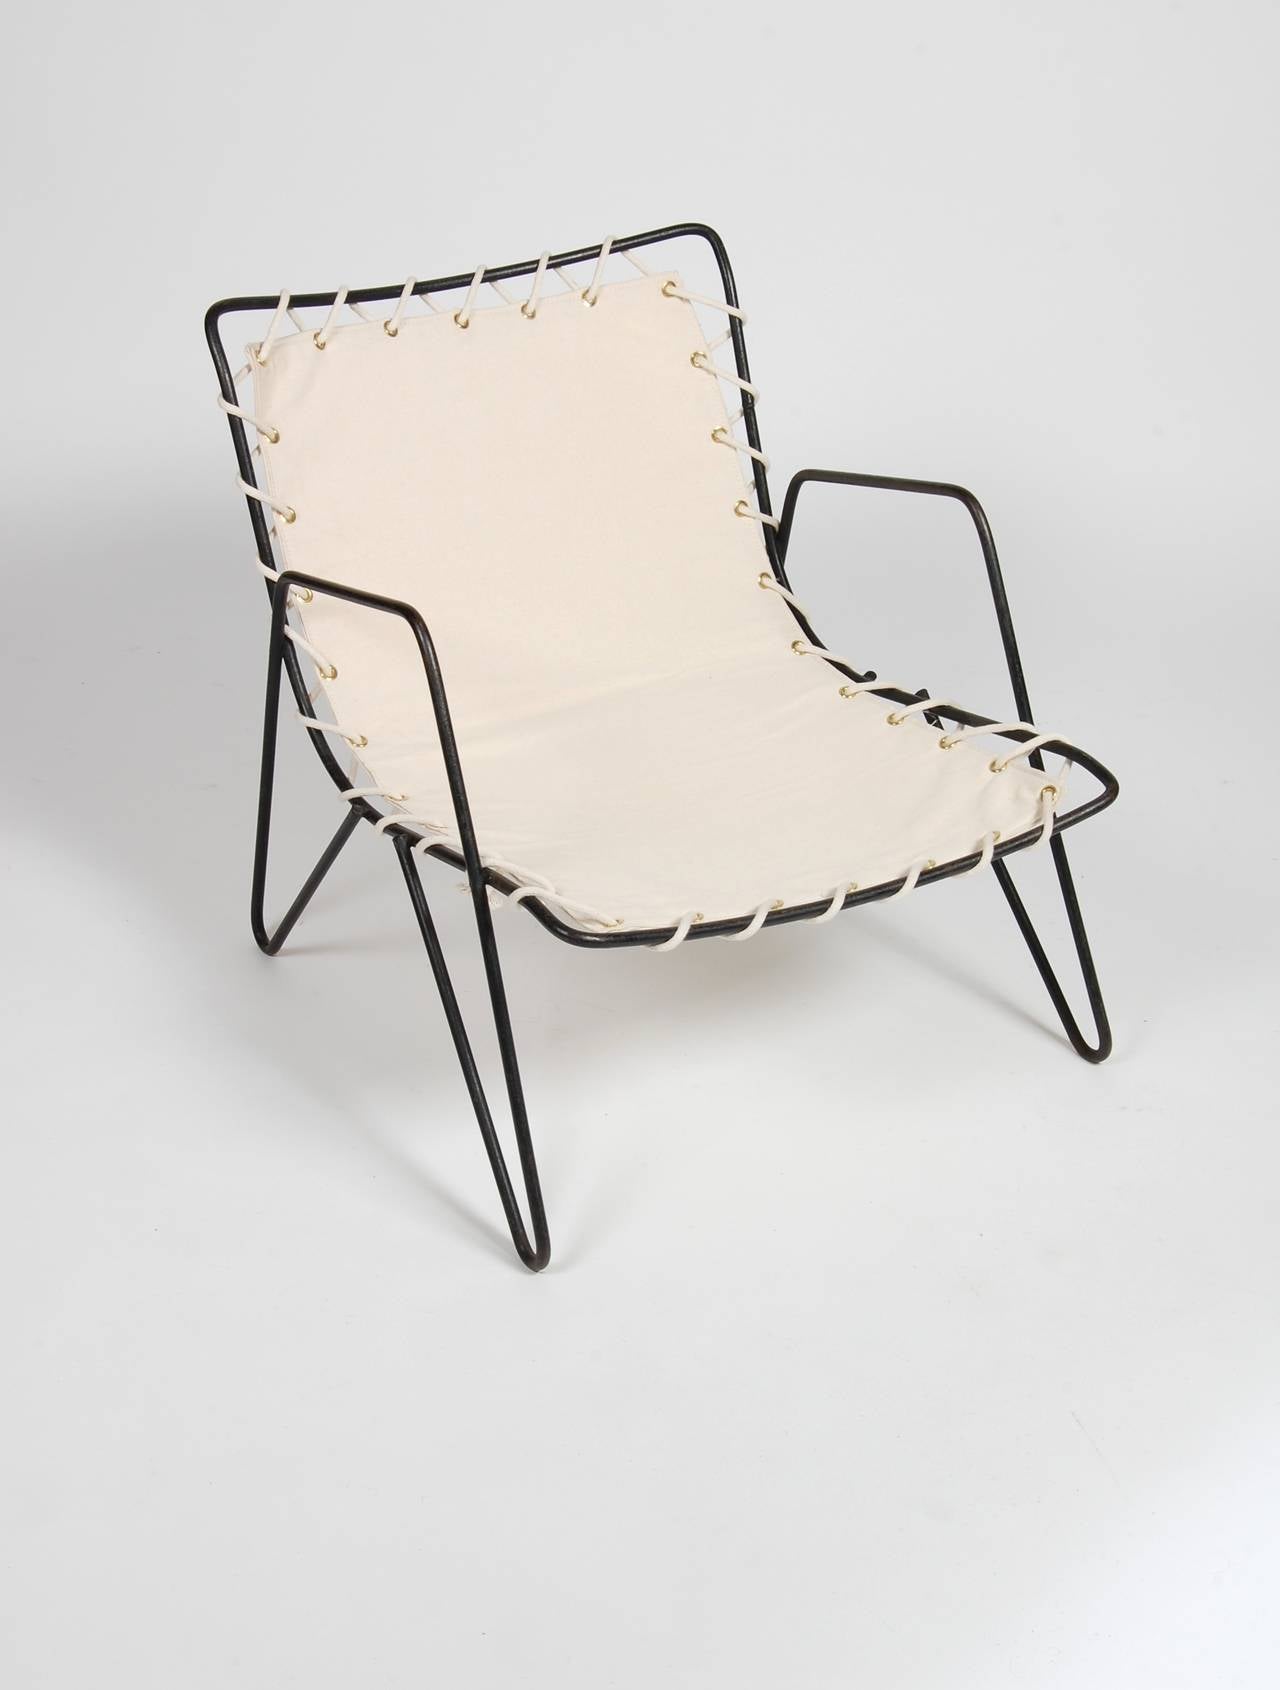 A very direct lounge chair design in period modernist patio furniture, having a curvy shaped seat attached to a soft hair pin leg to armrest form created out of rod iron. Covered in new canvas and attached via cotton yacht cord.